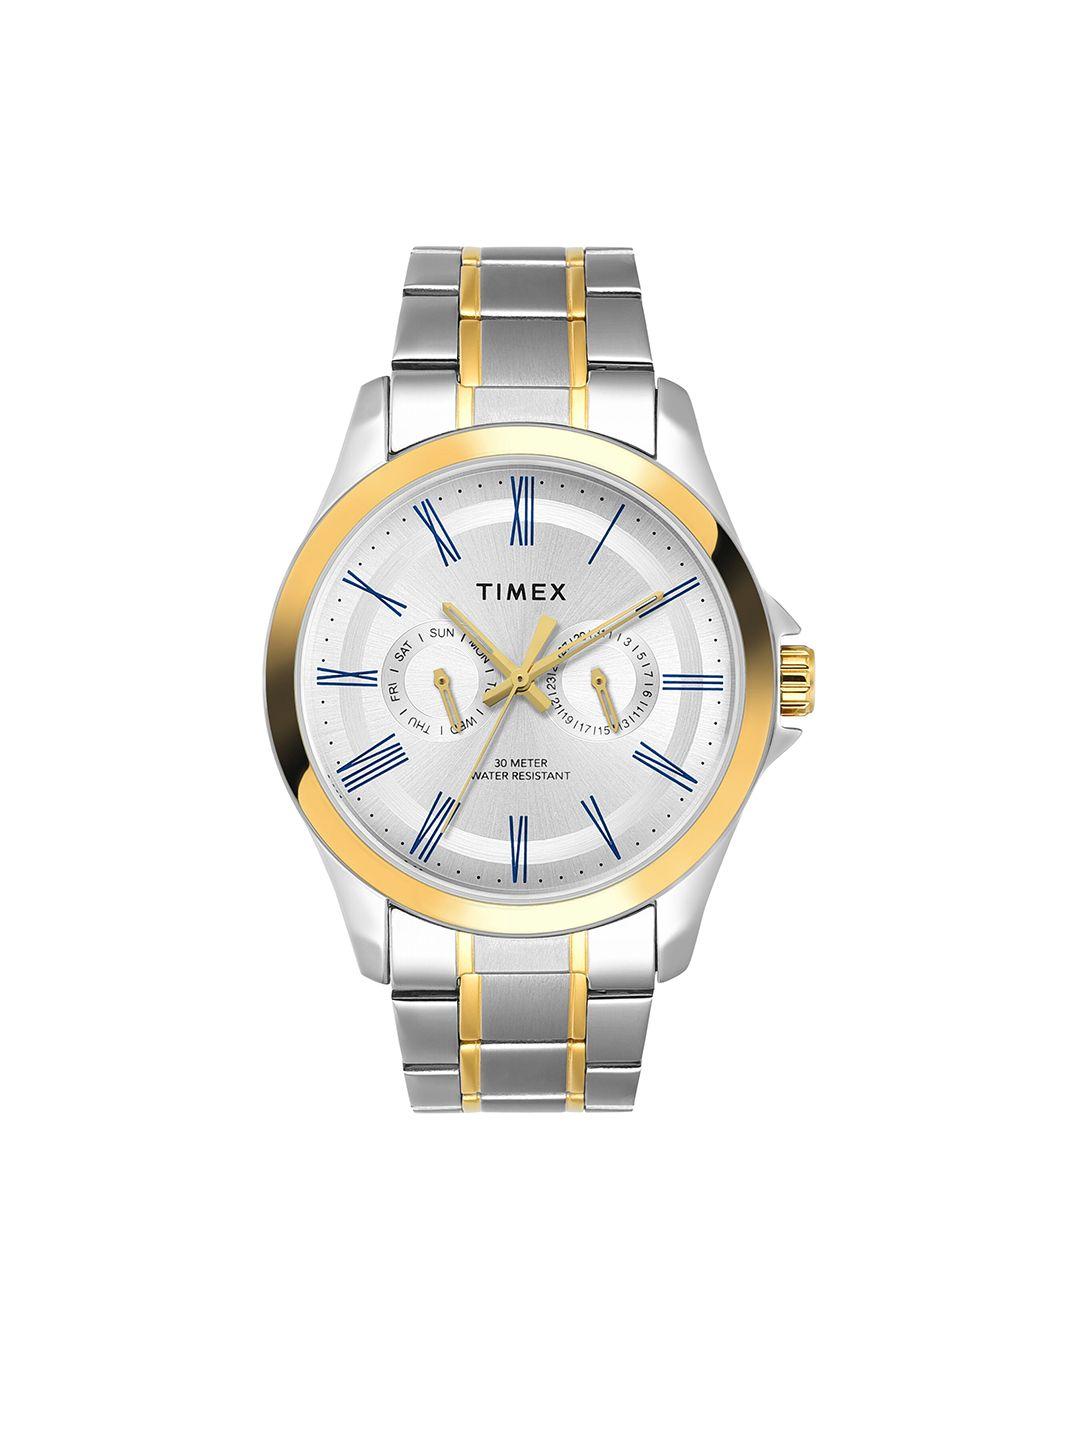 timex-men-stainless-steel-bracelet-style-straps-analogue-chronograph-watch